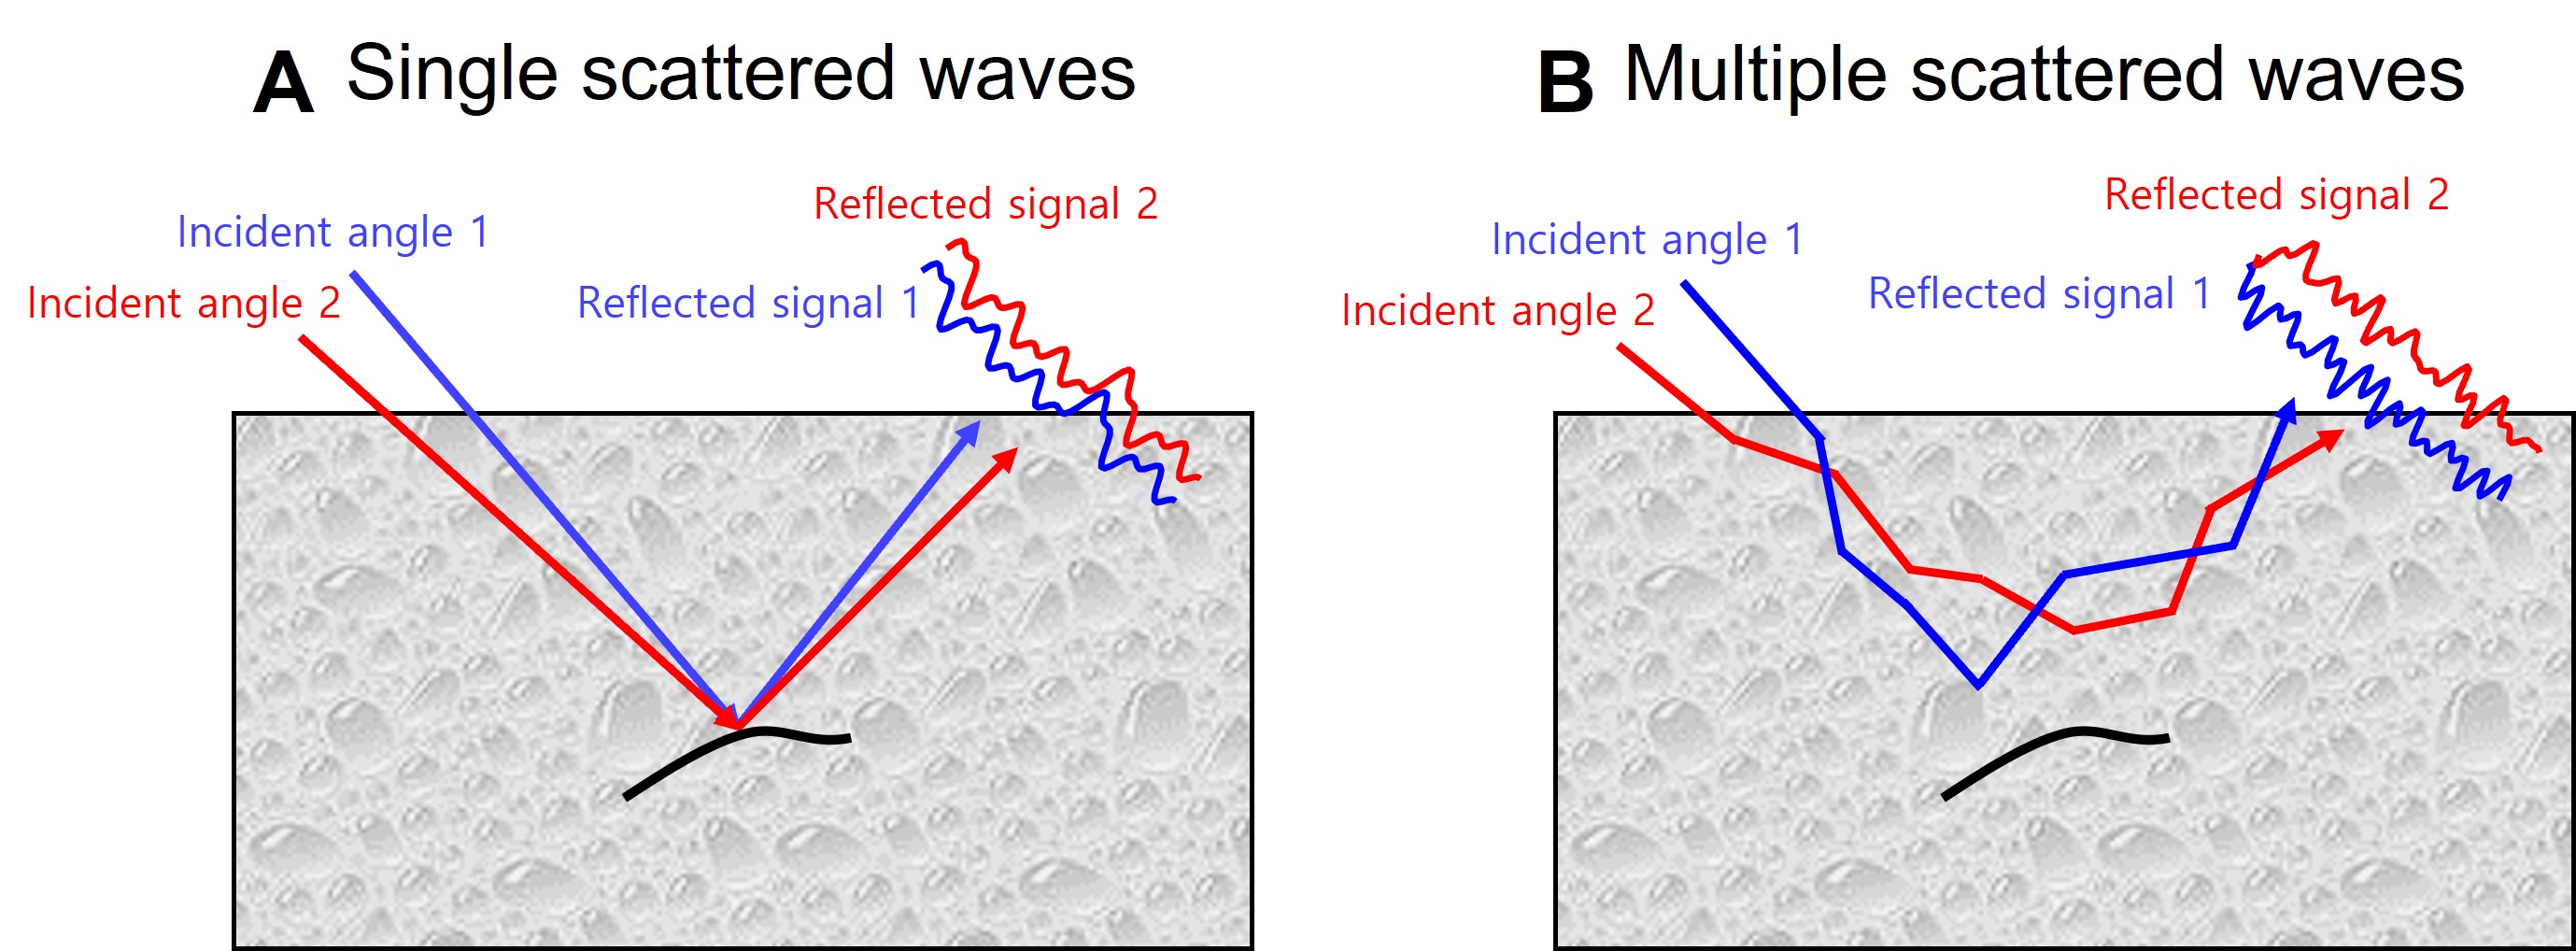 Figure 2. Characteristics of the reflected signal according to the incident angle